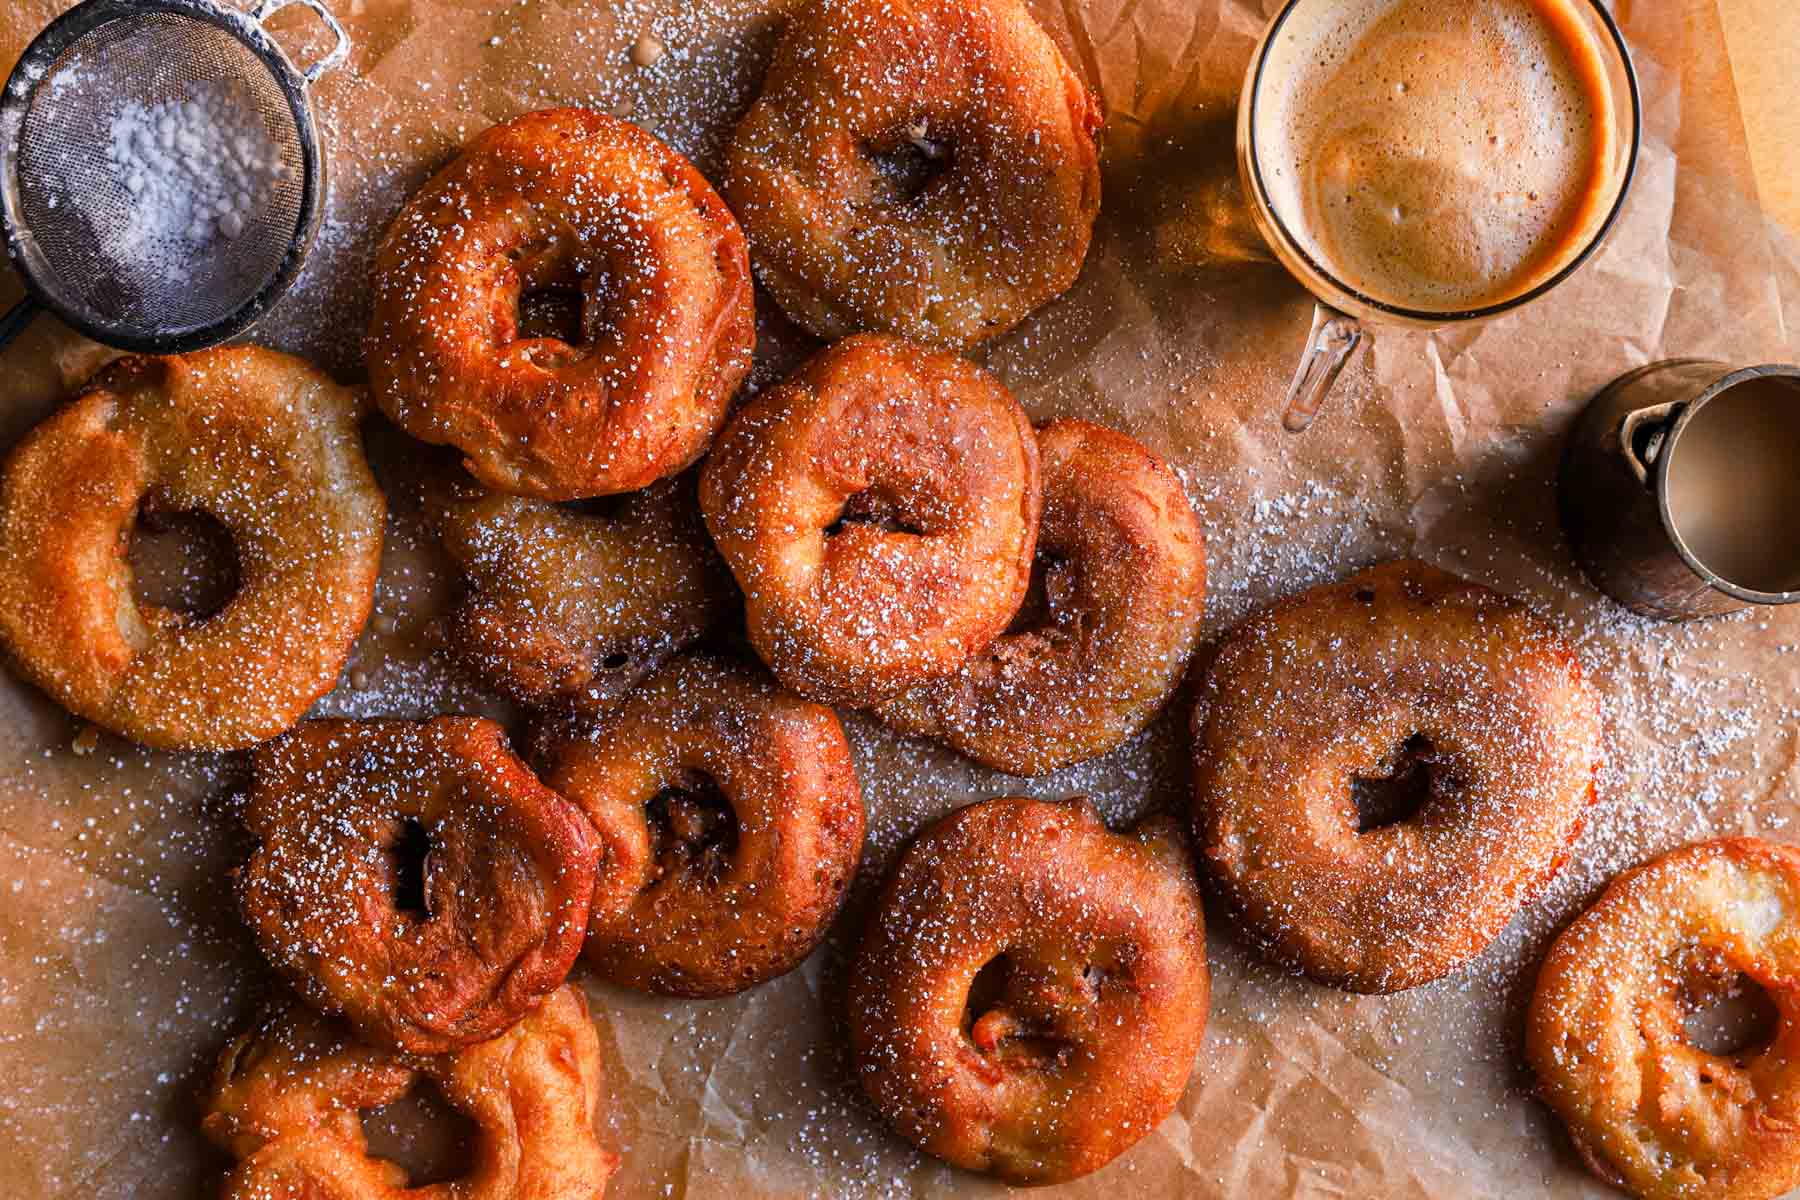 Homemade Apple Fritters are displayed on a table. The apple rings are fried golden in a cinnamon-spiced batter.